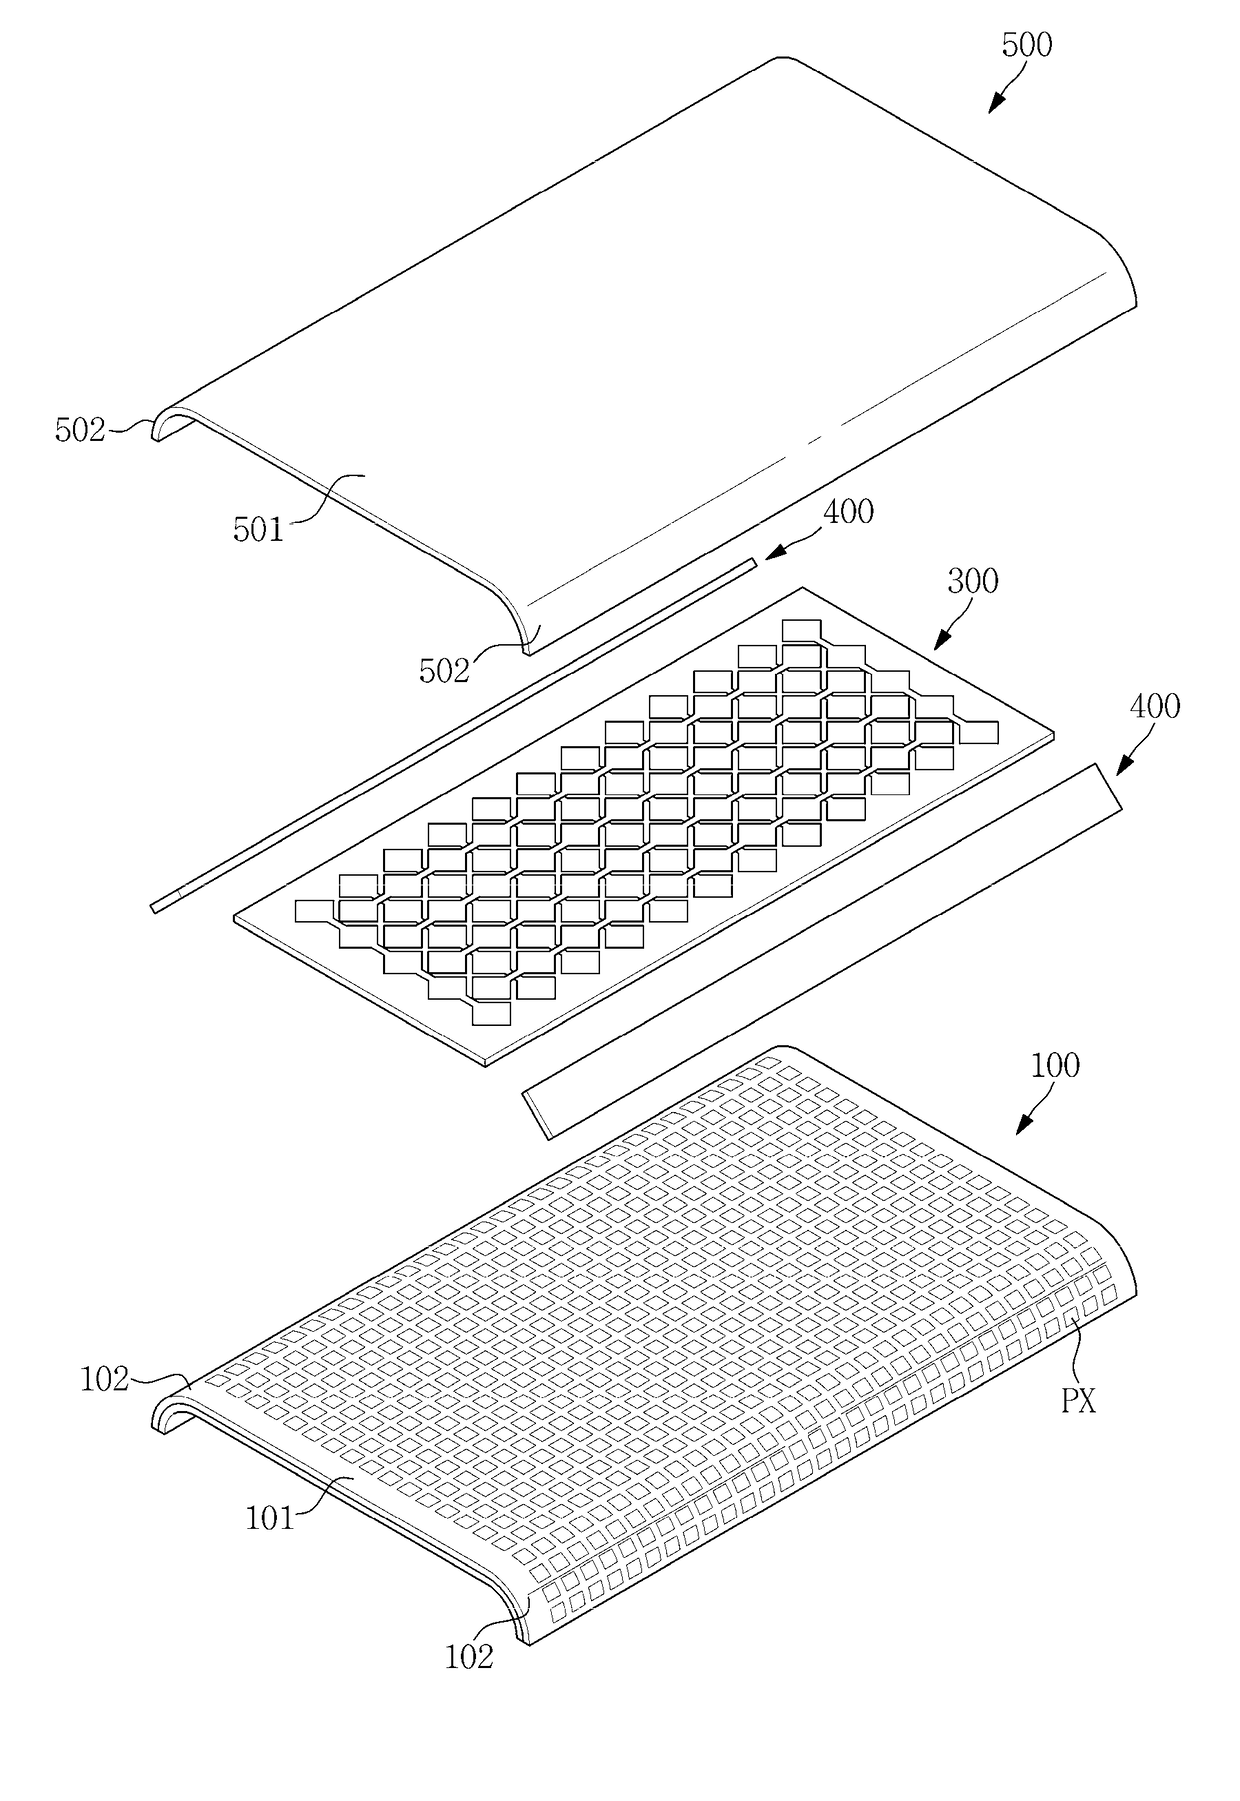 Display device having a planar surface portion and a curved surface portion